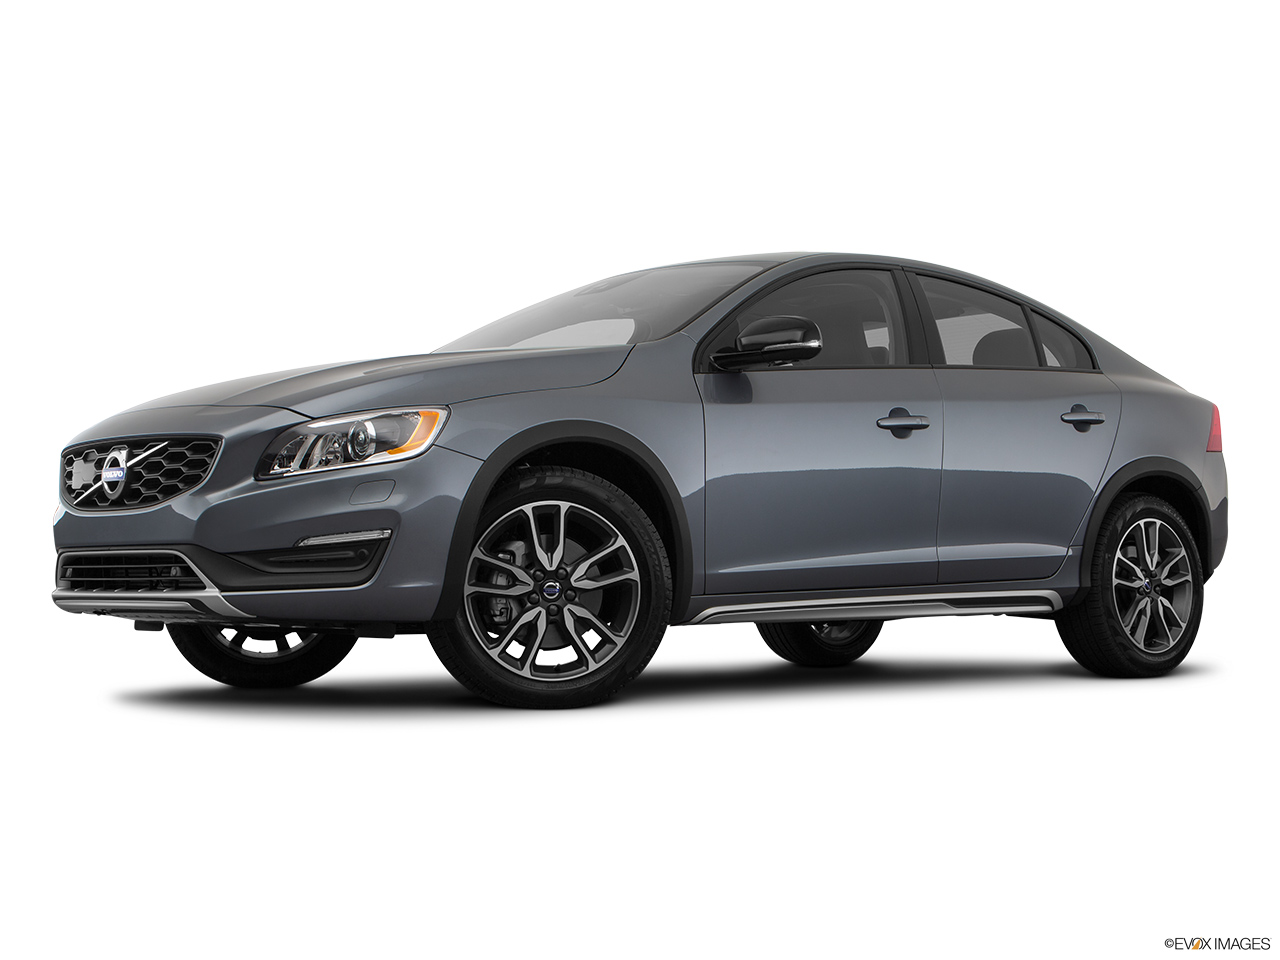 2018 Volvo S60 Cross Country T5 AWD Low/wide front 5/8. 